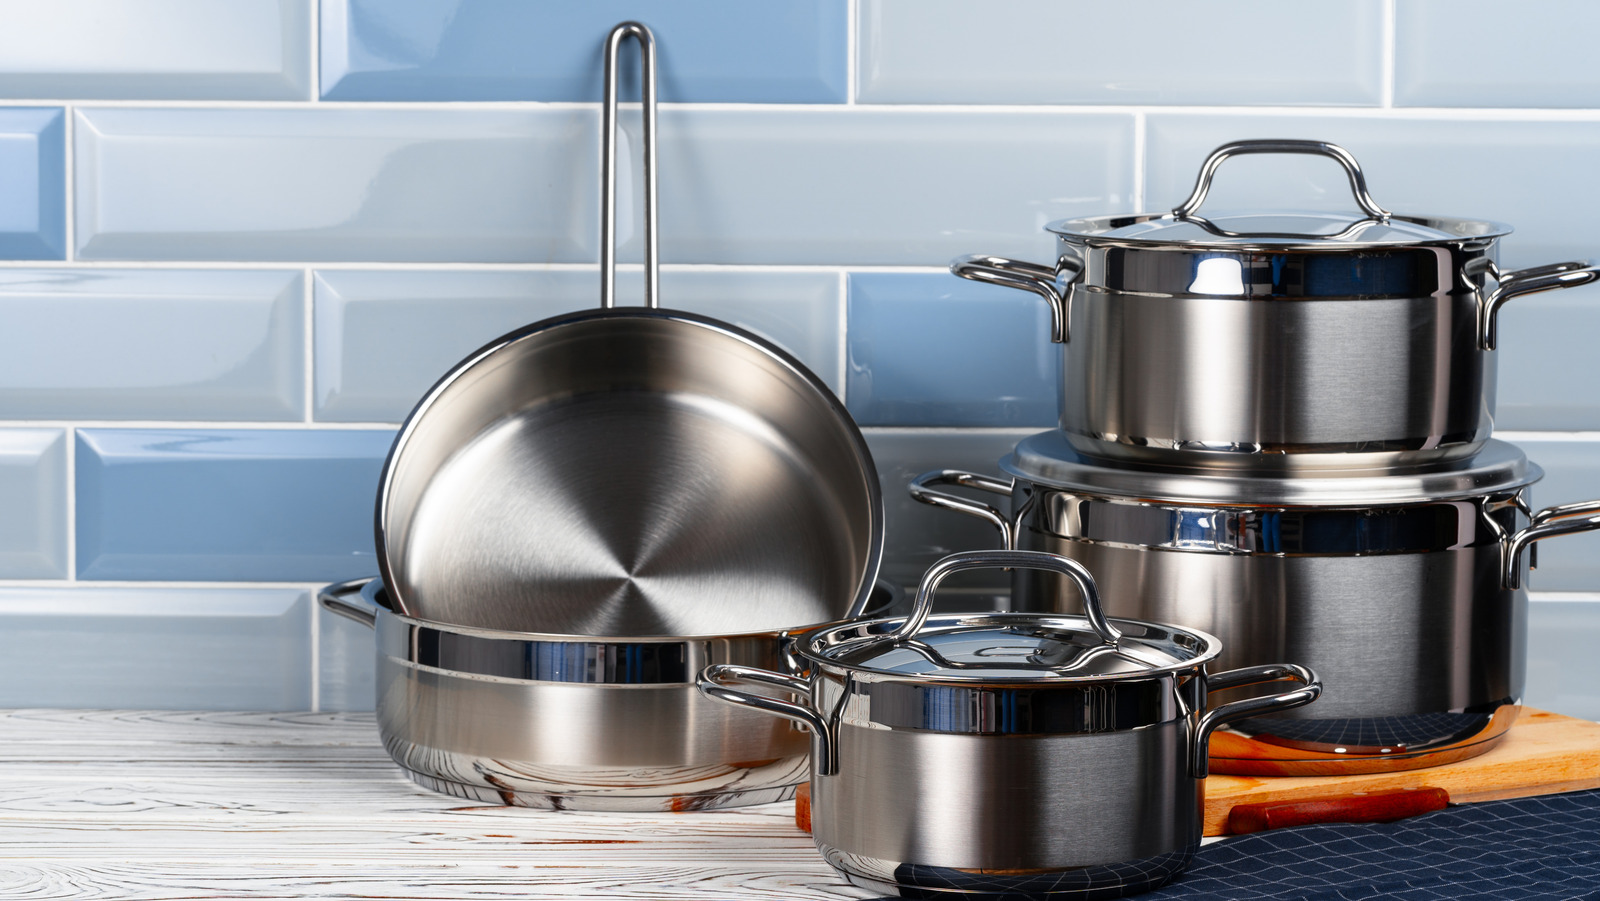 Induction cooking 101: Do you really have to buy new pots and pans